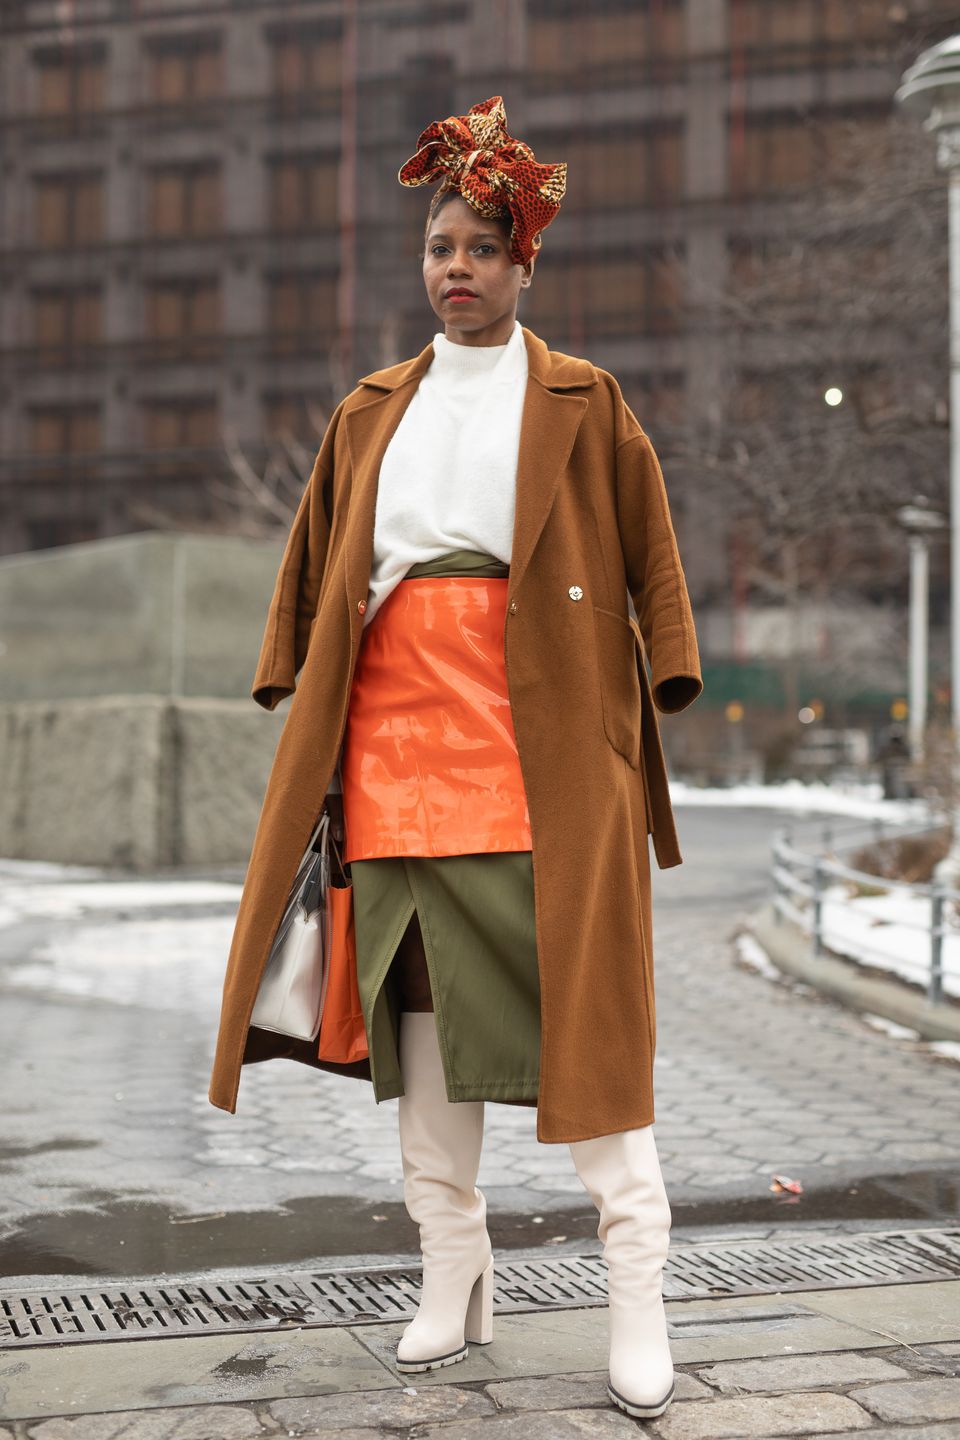 The Best Street Style Moments From Fashion Month | HuffPost Life